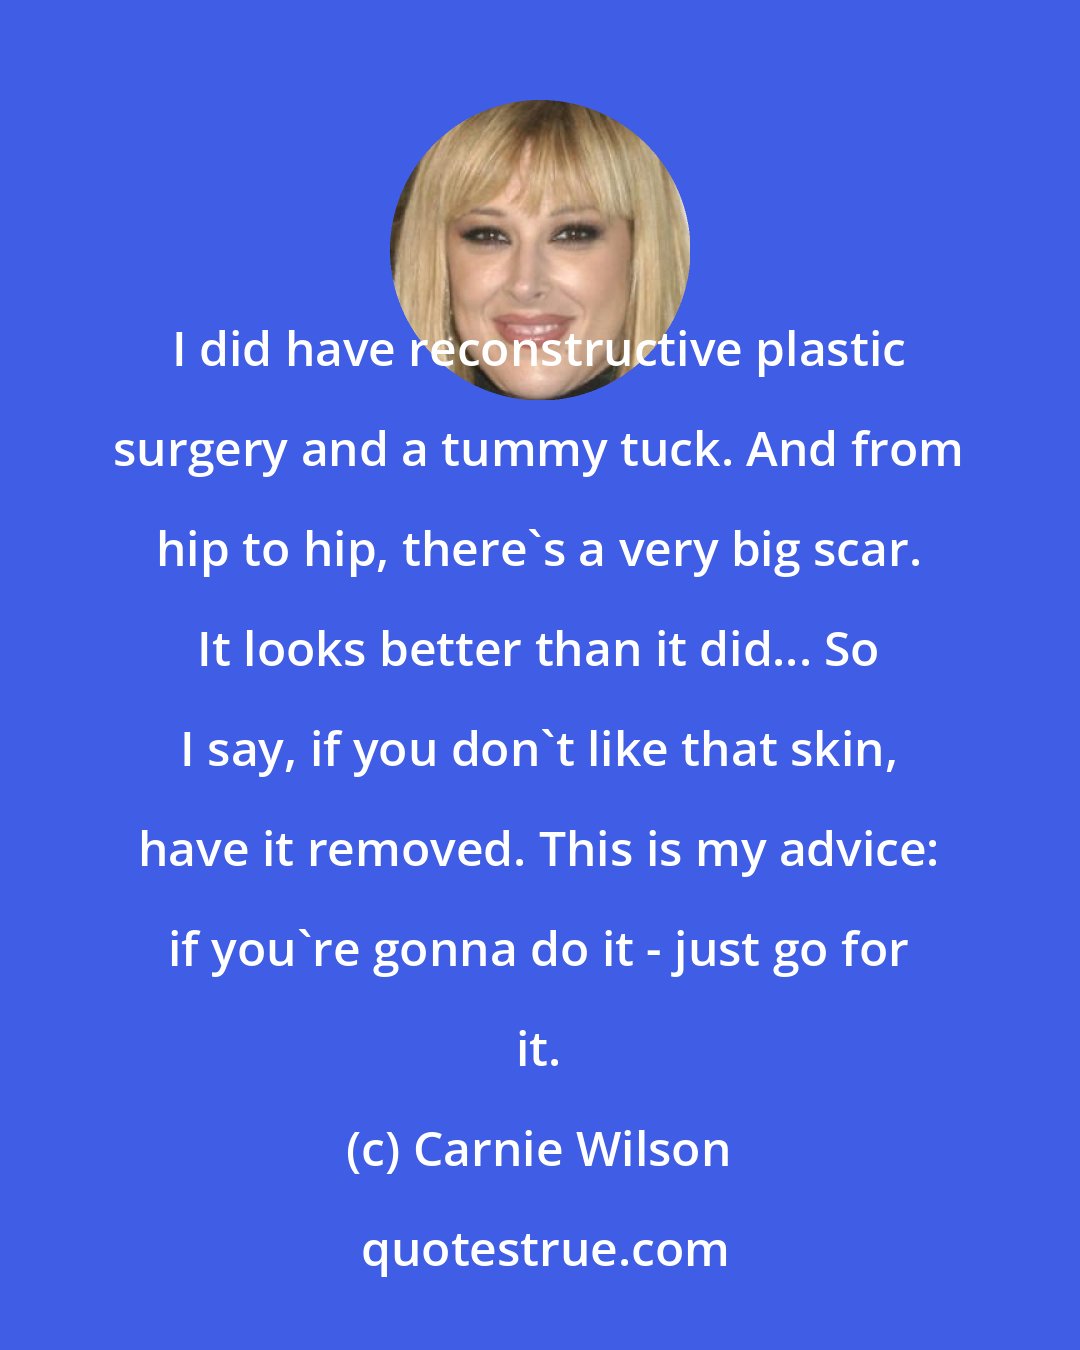 Carnie Wilson: I did have reconstructive plastic surgery and a tummy tuck. And from hip to hip, there's a very big scar. It looks better than it did... So I say, if you don't like that skin, have it removed. This is my advice: if you're gonna do it - just go for it.